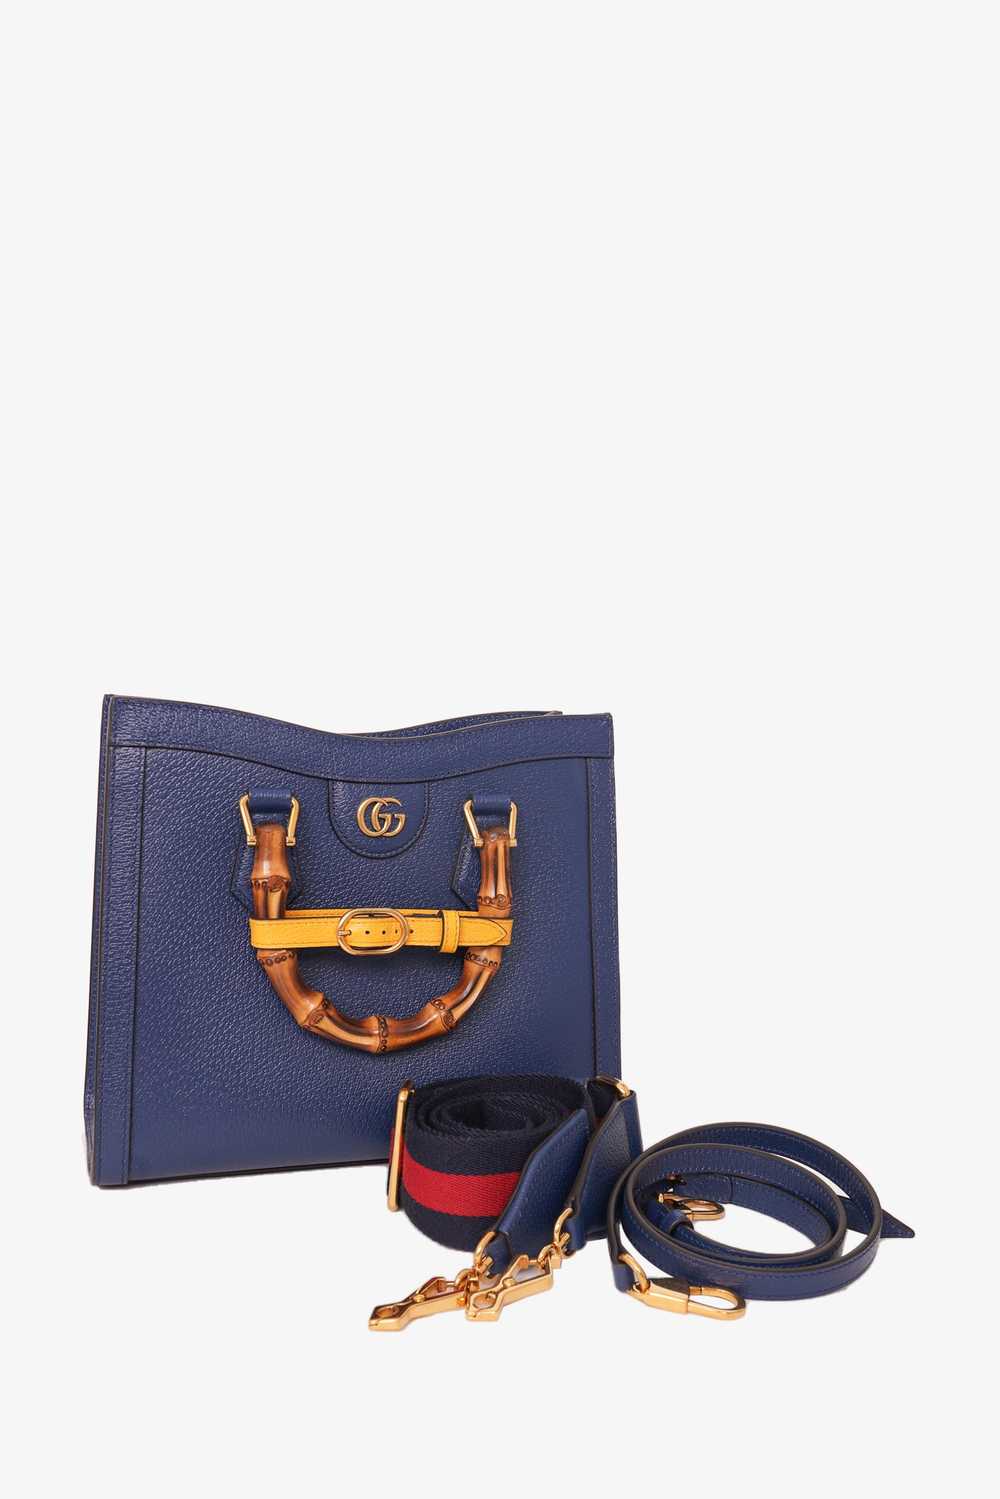 Gucci Blue Leather Diana Small Tote Bag - image 6